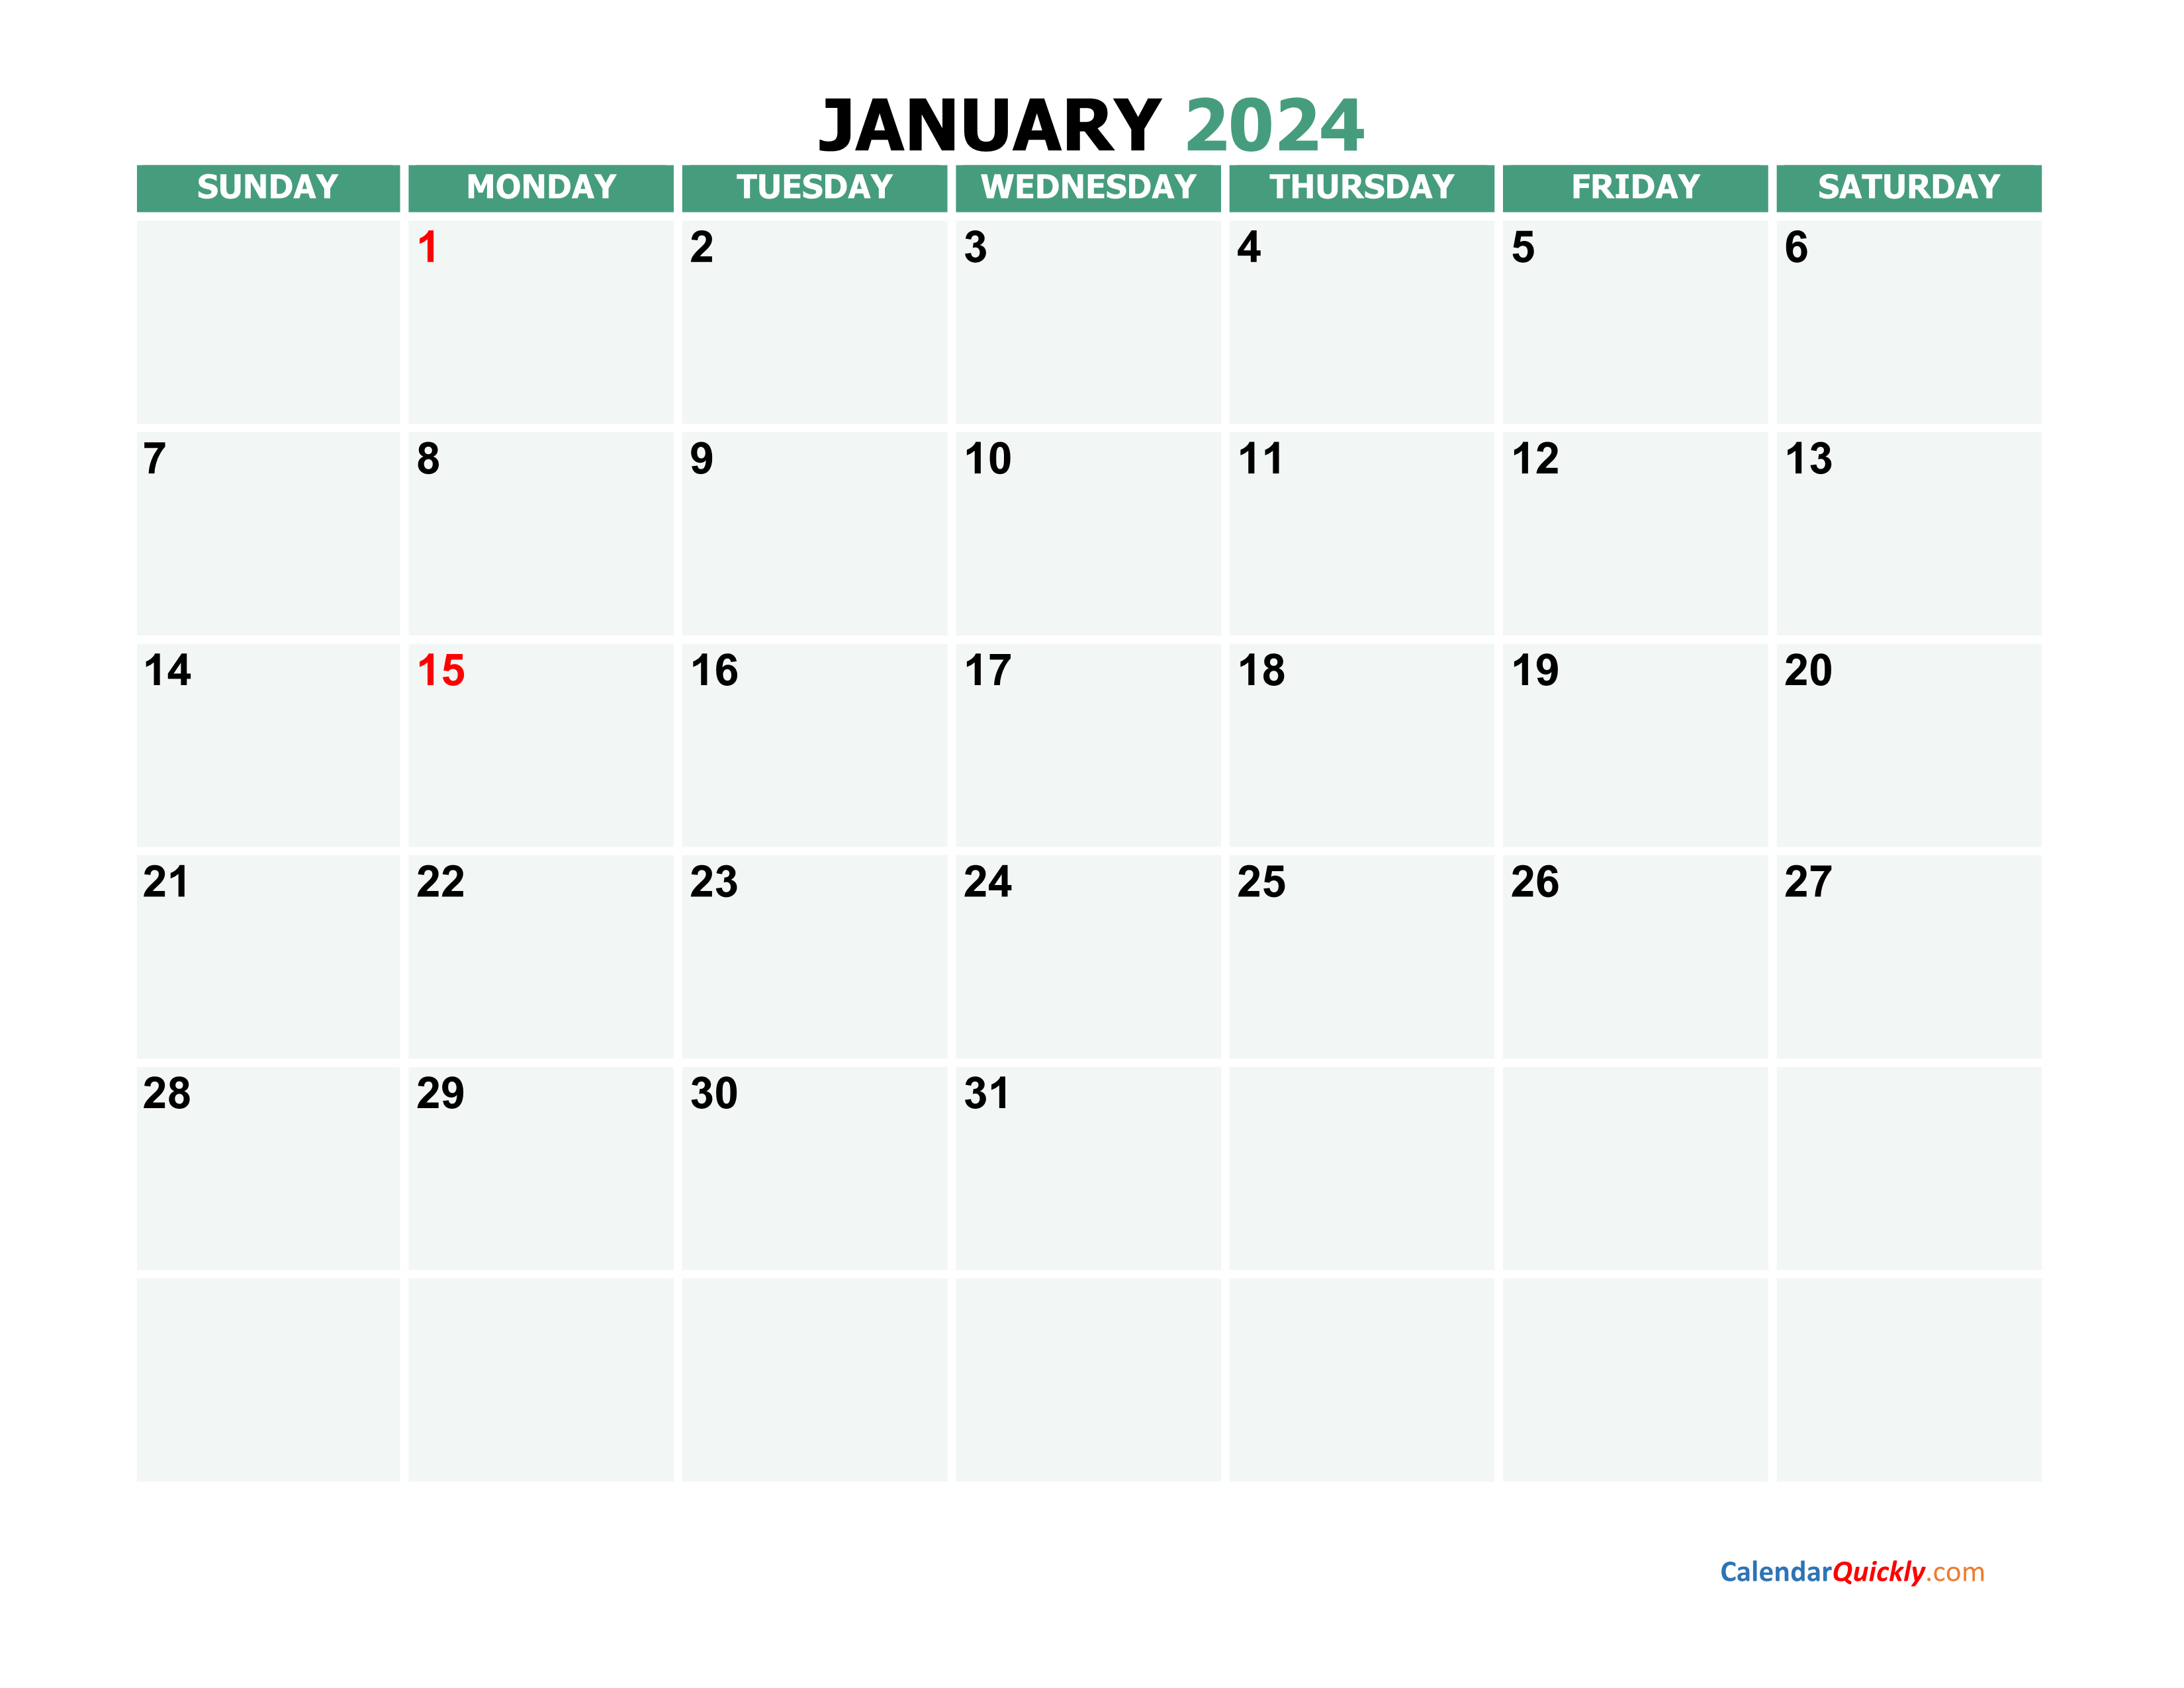 free-printable-2024-monthly-calendar-monthly-calendar-2024-with-holidays-calendar-quickly